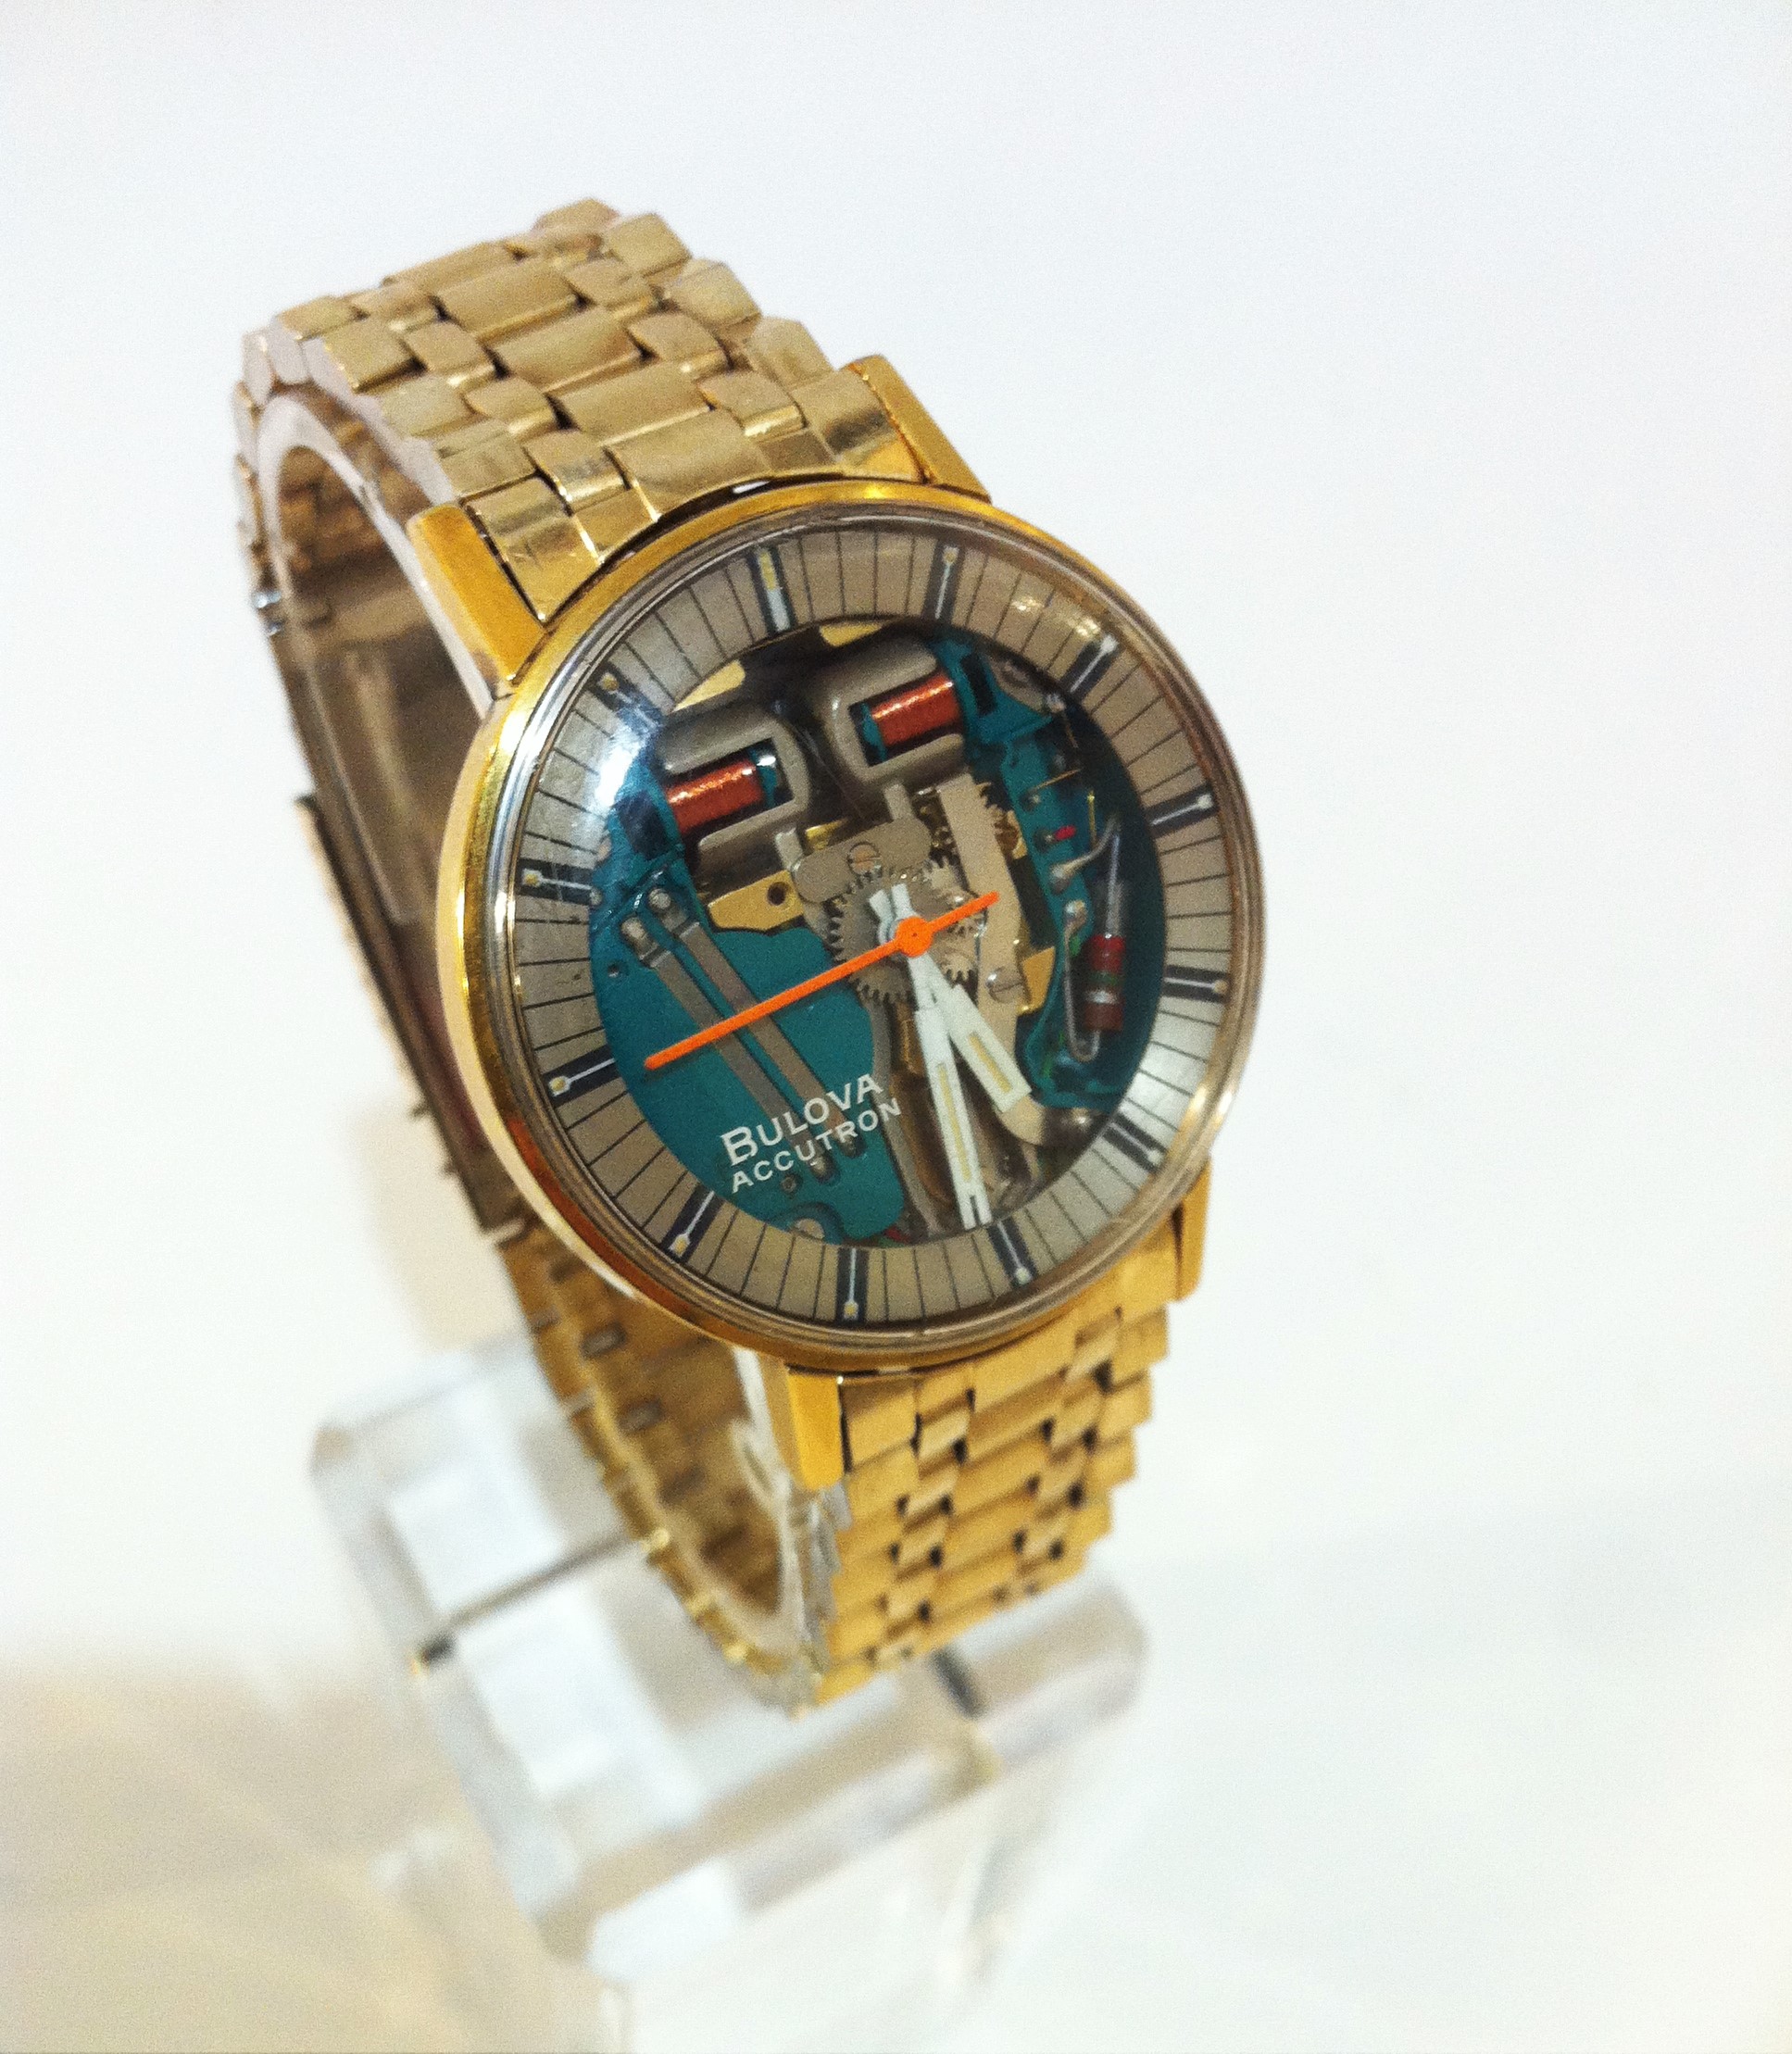 Bulova Accutron from our collection